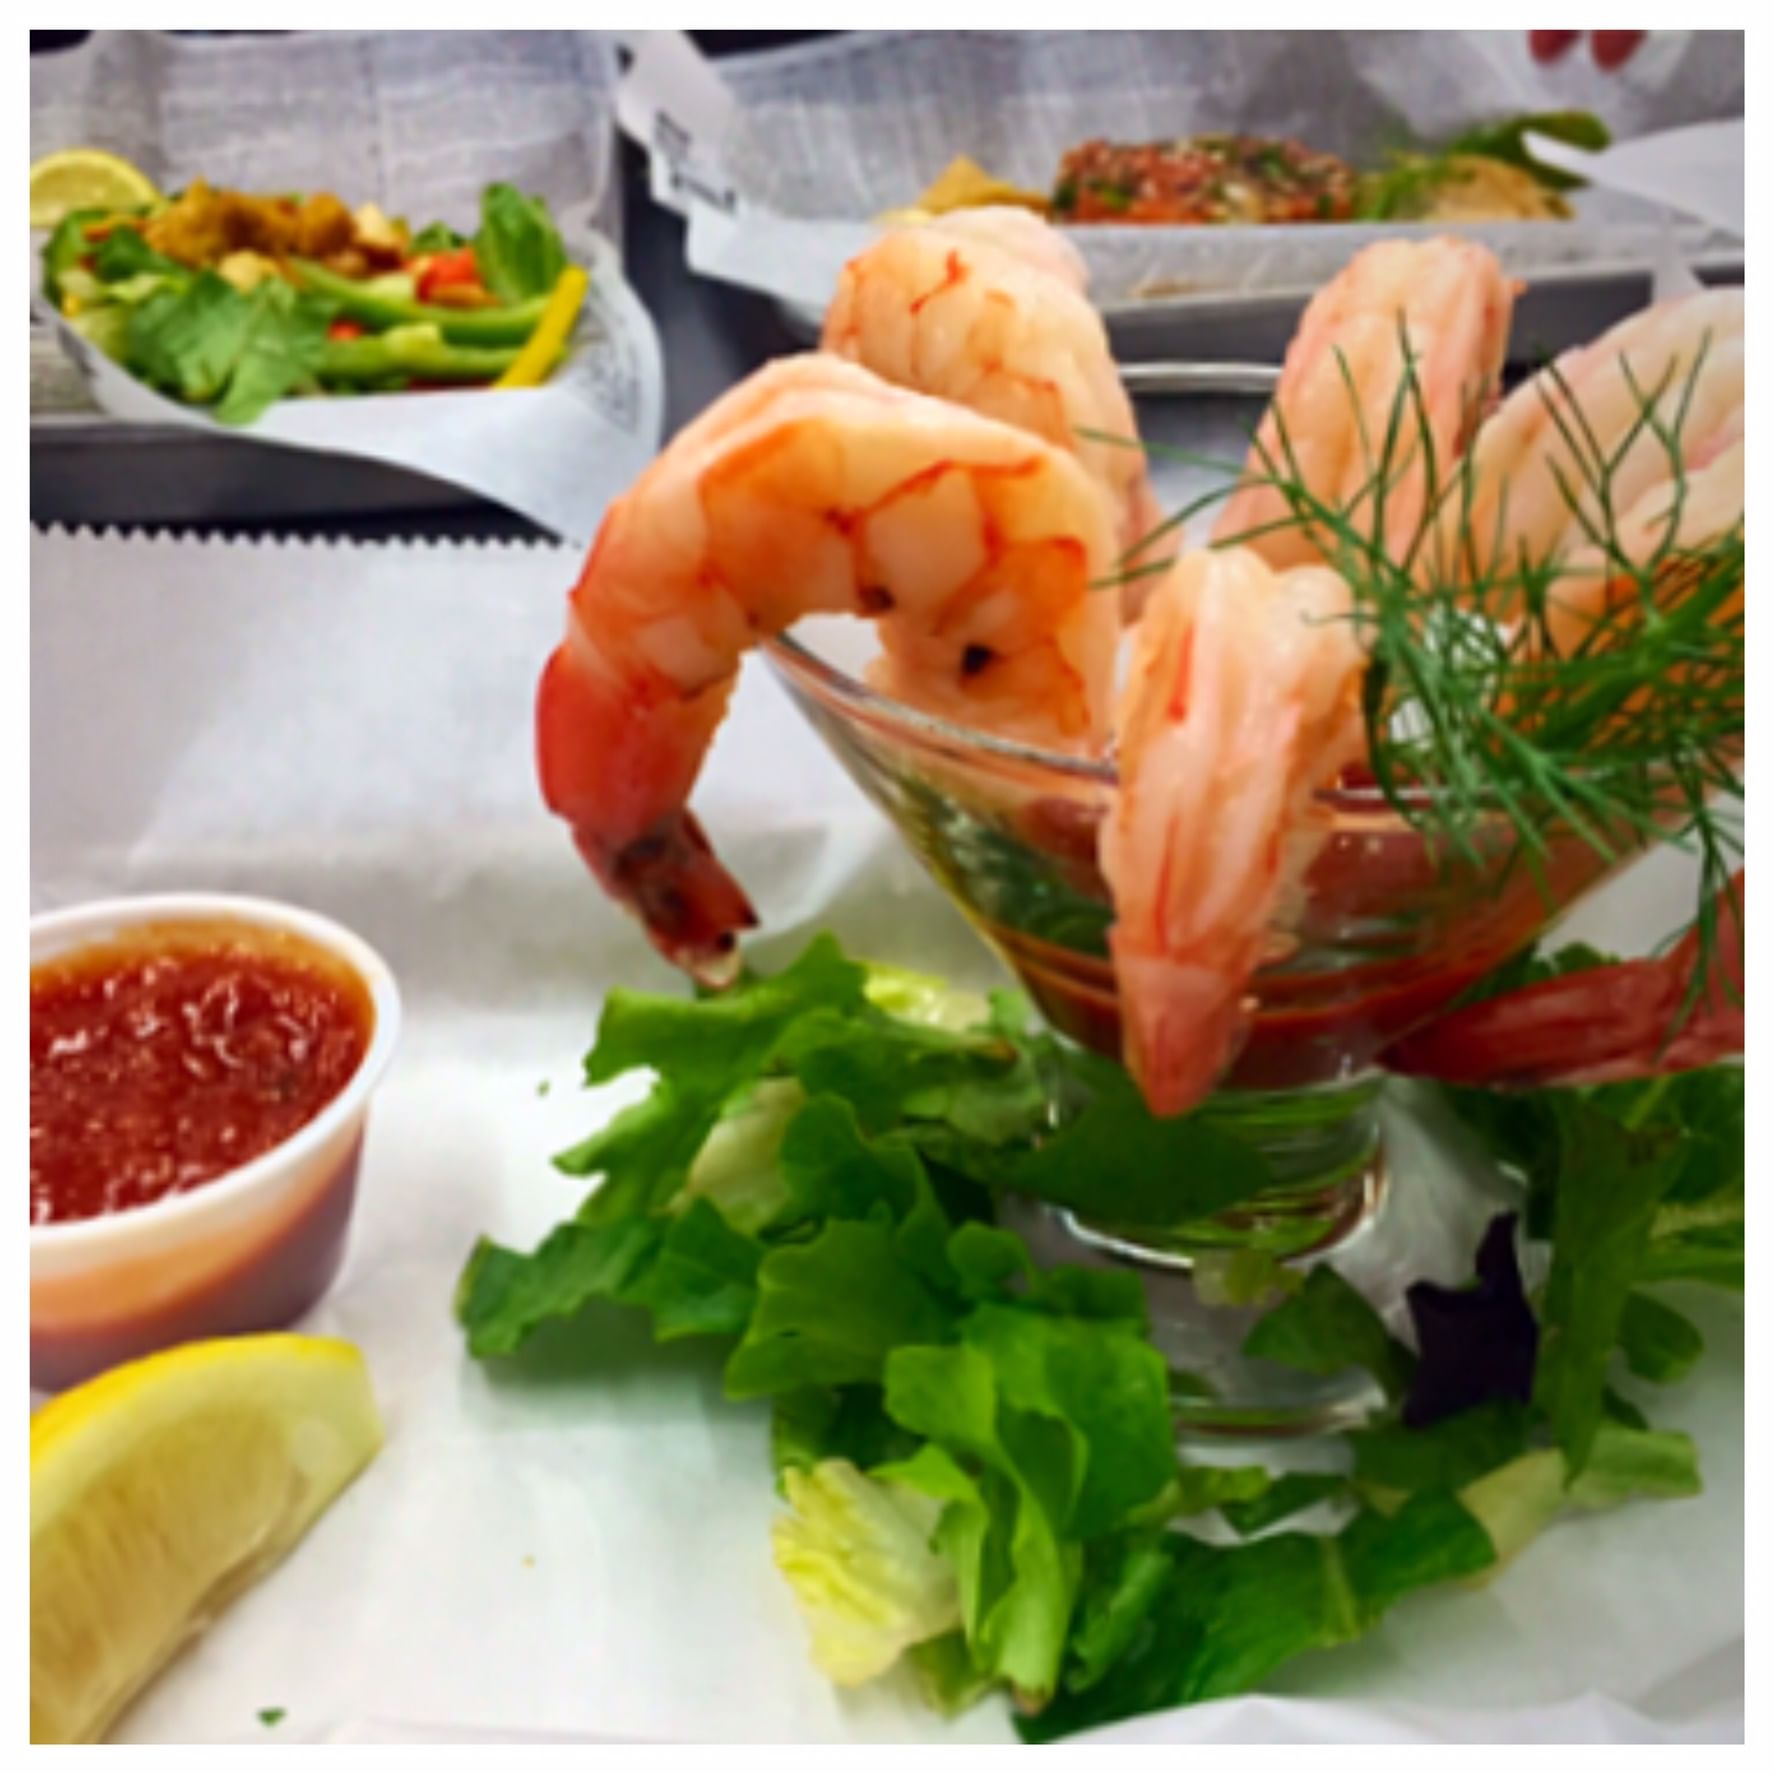 Delicious Shrimp Dishes at Our Seafood Restaurant